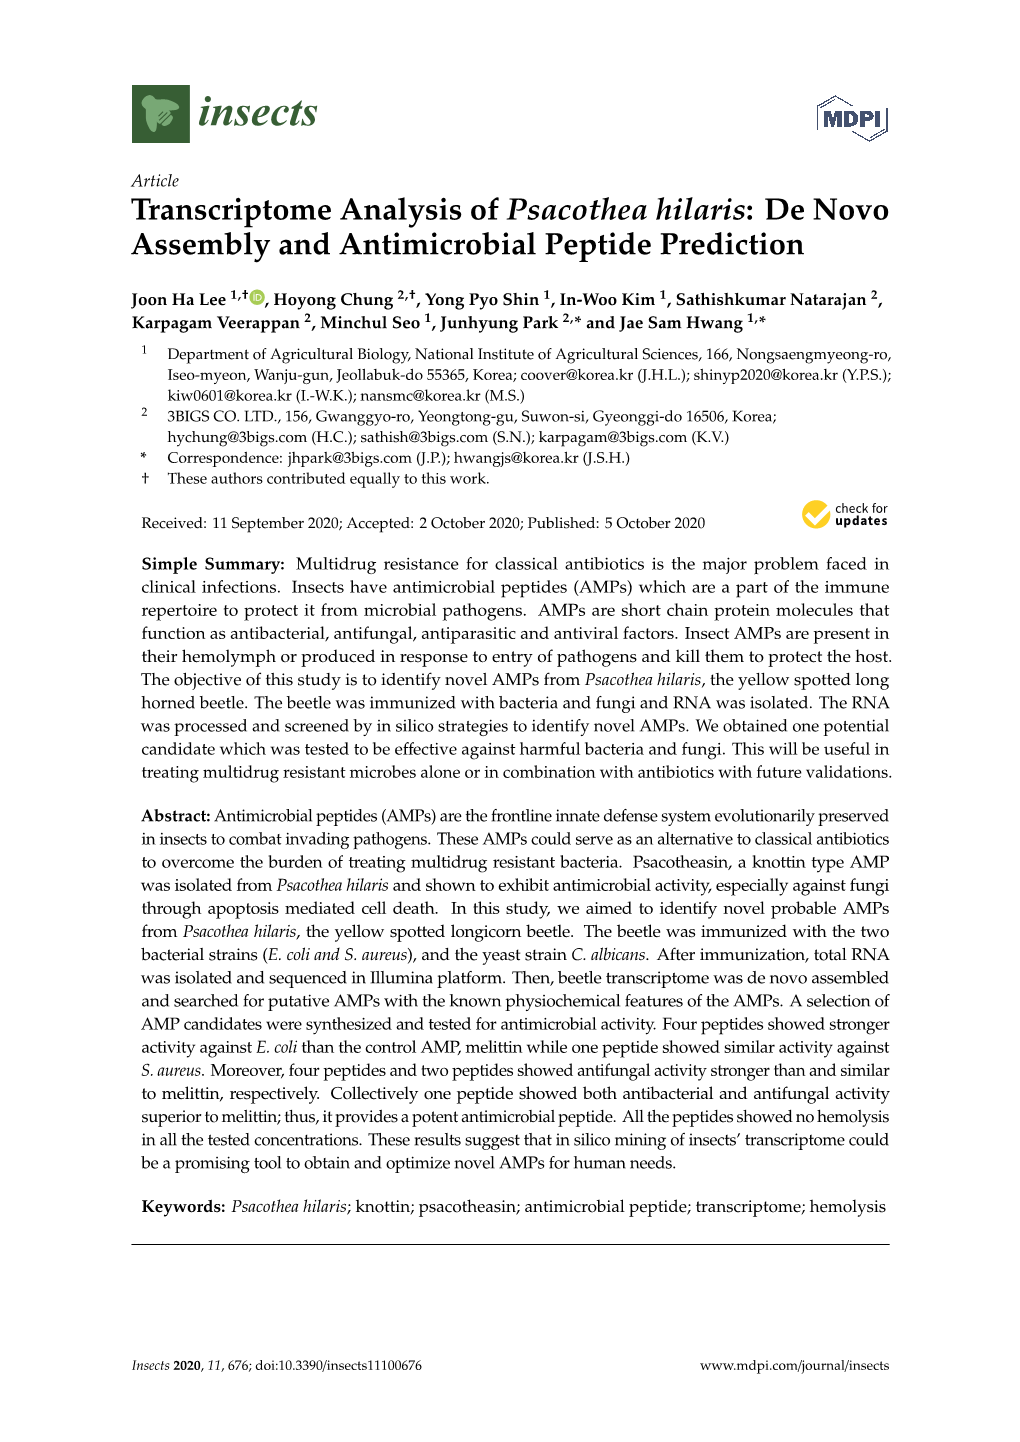 Transcriptome Analysis of Psacothea Hilaris: De Novo Assembly and Antimicrobial Peptide Prediction